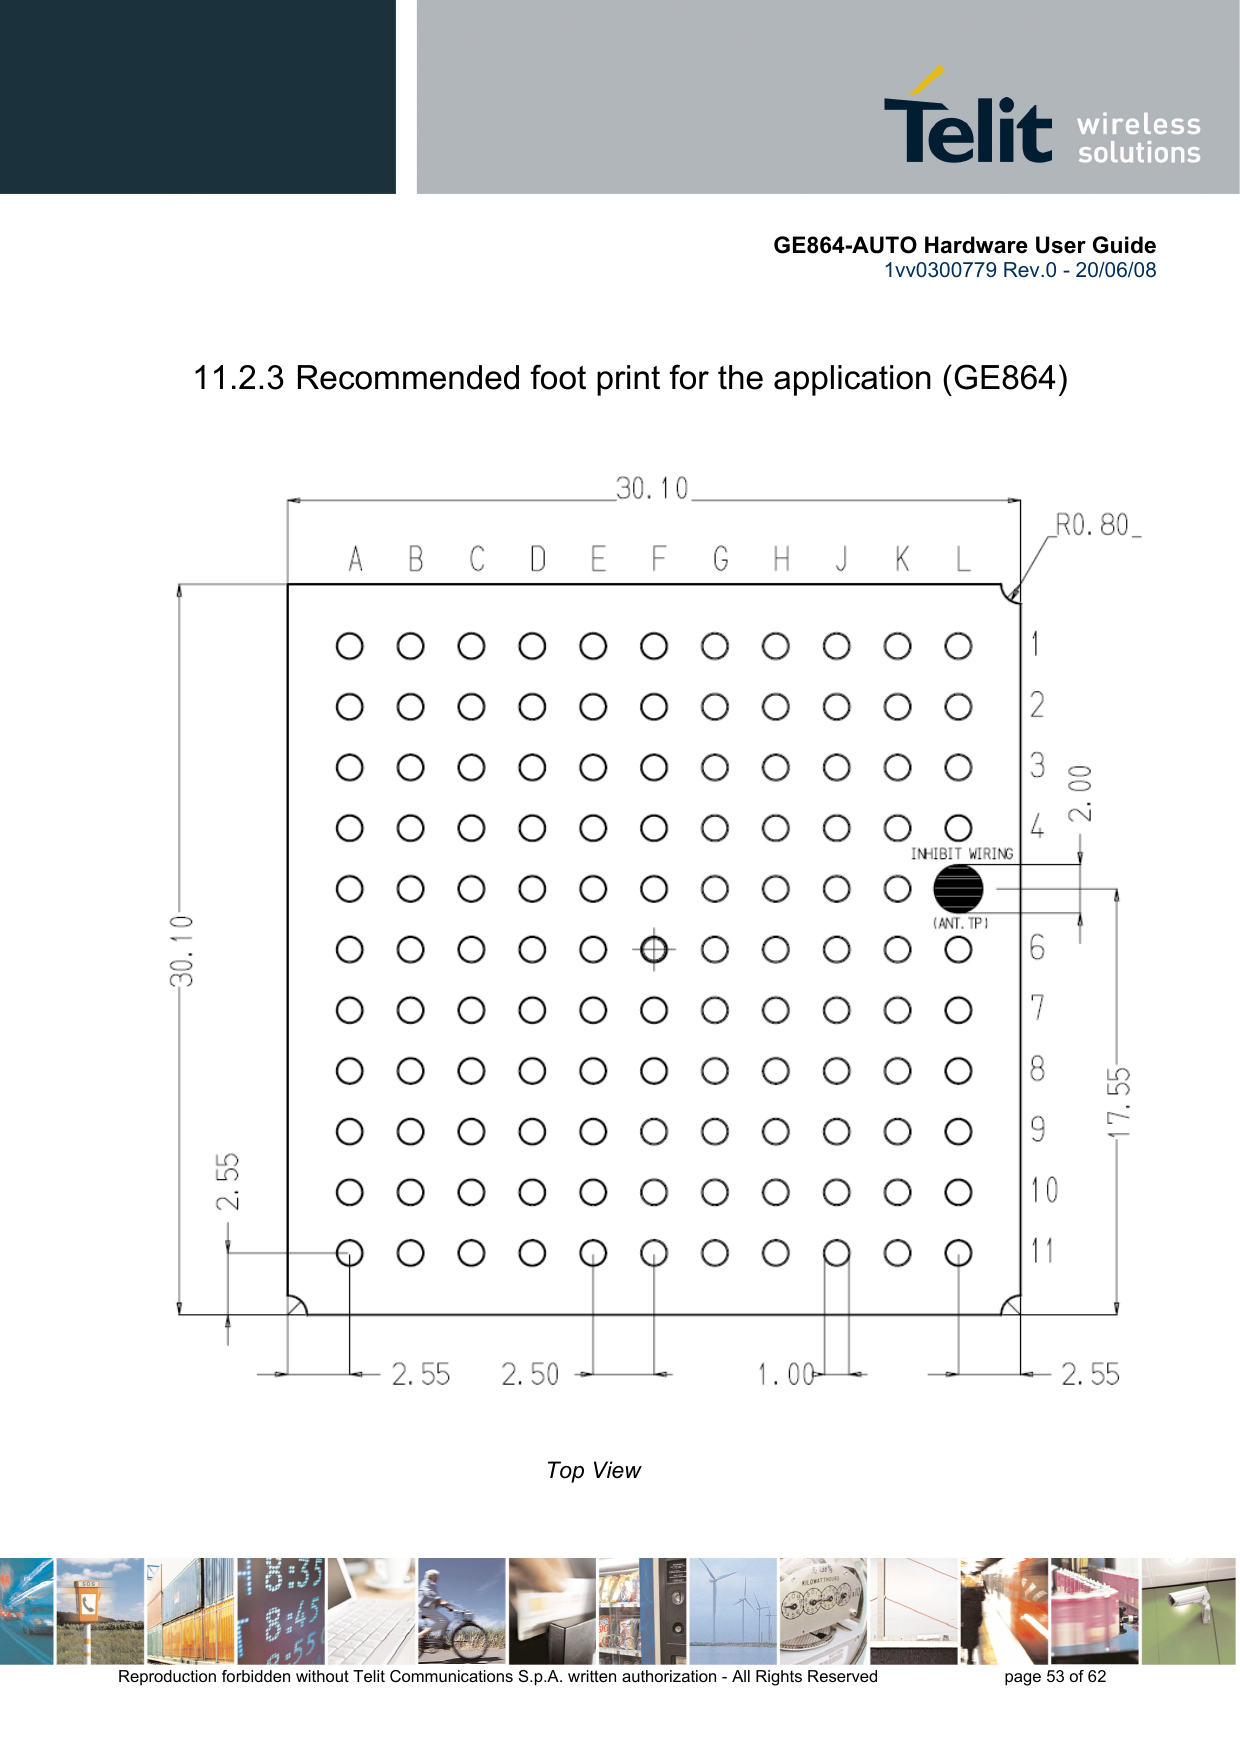       GE864-AUTO Hardware User Guide 1vv0300779 Rev.0 - 20/06/08      Reproduction forbidden without Telit Communications S.p.A. written authorization - All Rights Reserved    page 53 of 62   11.2.3 Recommended foot print for the application (GE864)                                                                                                                          Top View                                                                                                                   